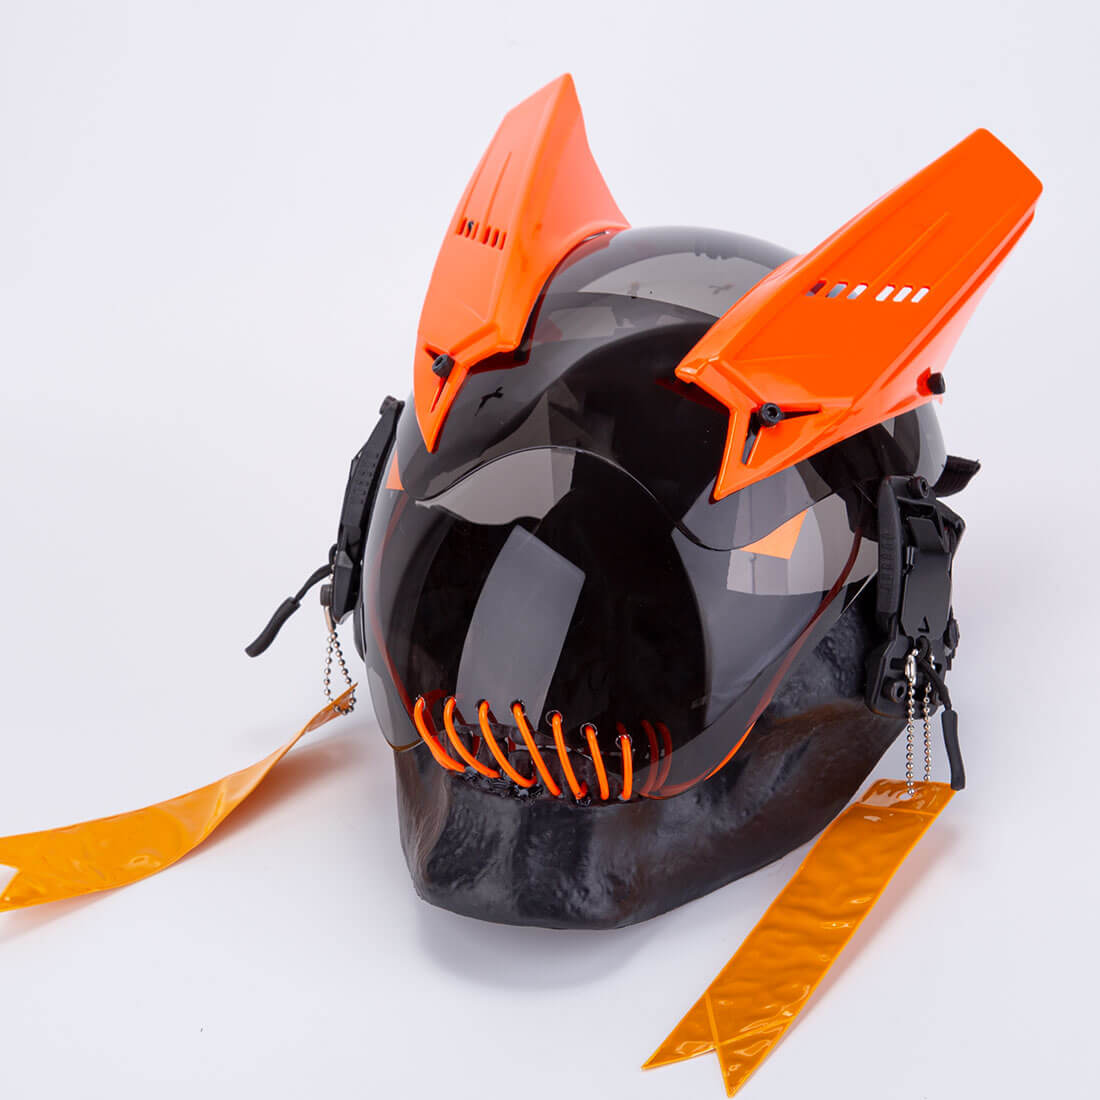 cyberpunk-mask-future-tech-helmet-with-streamers-for-cosplay-prop-halloween-costume